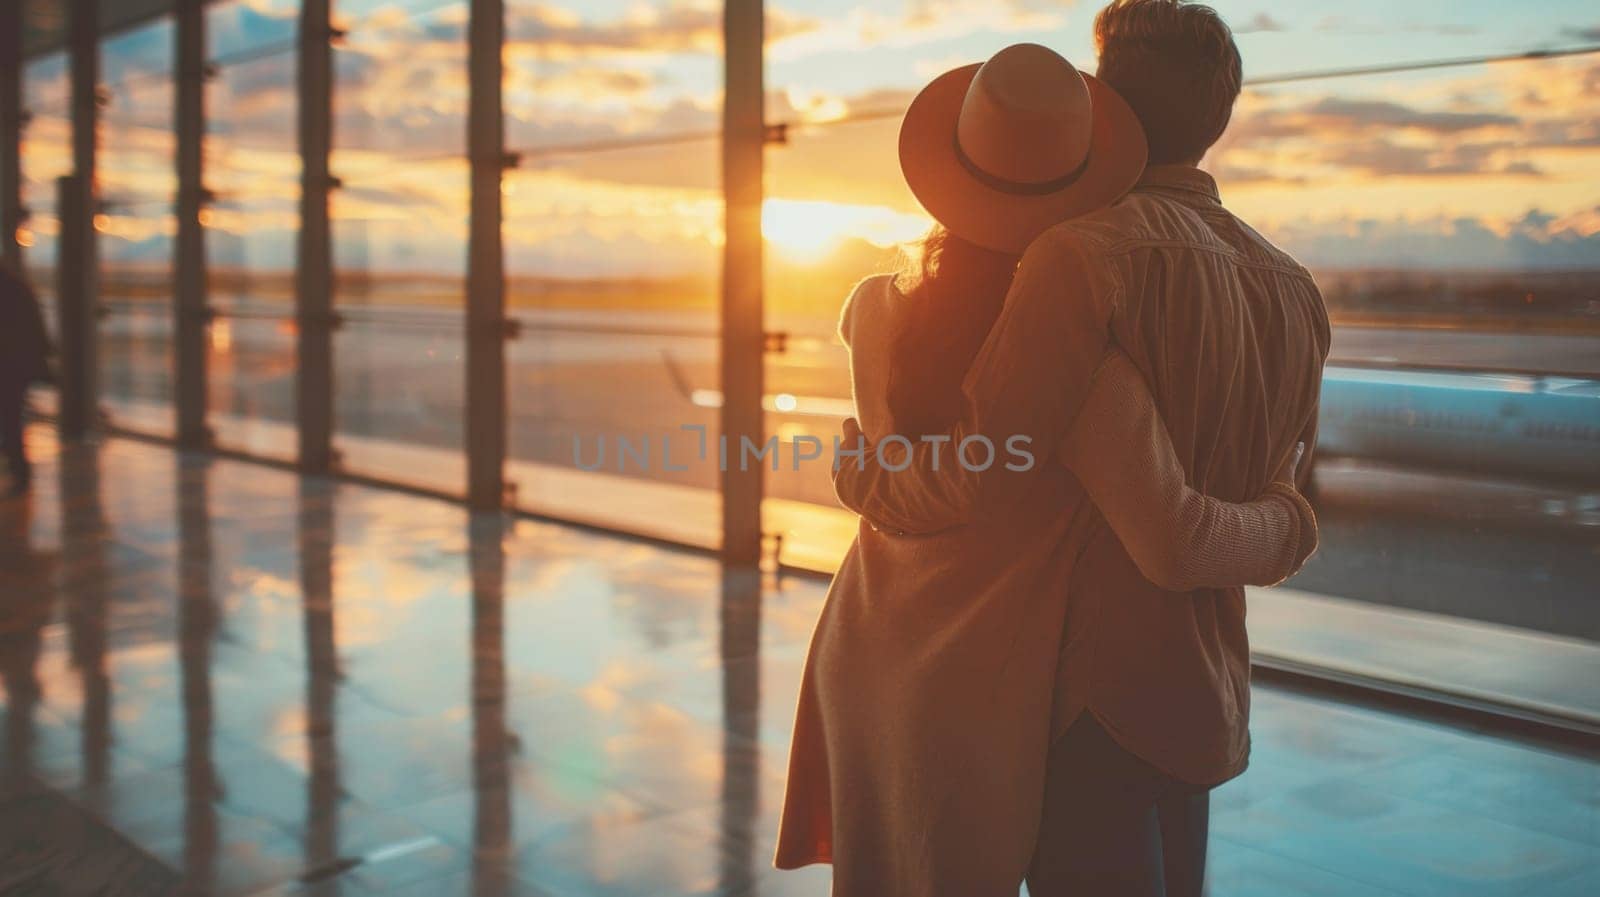 A couple embracing at an airport terminal window with a view of the sky, AI by starush